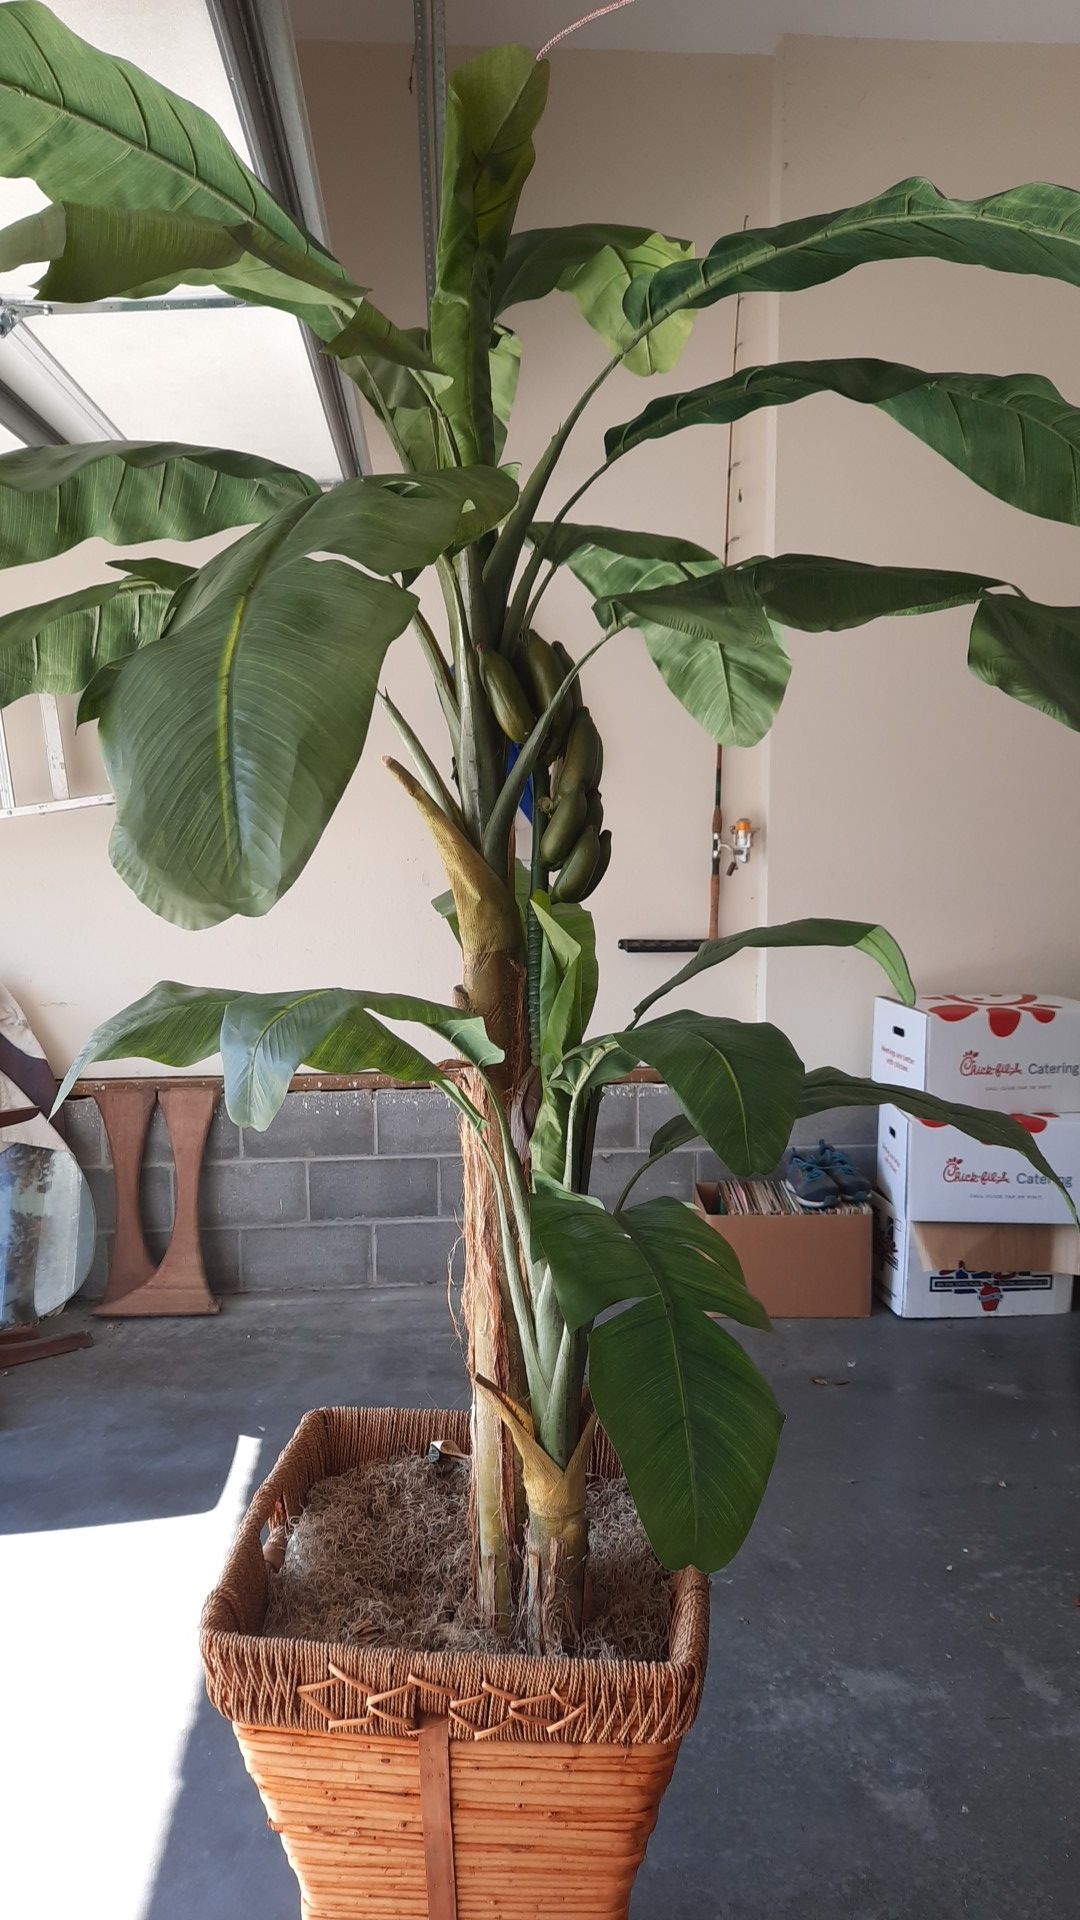 Artificial banana tree 8' tall including large basket